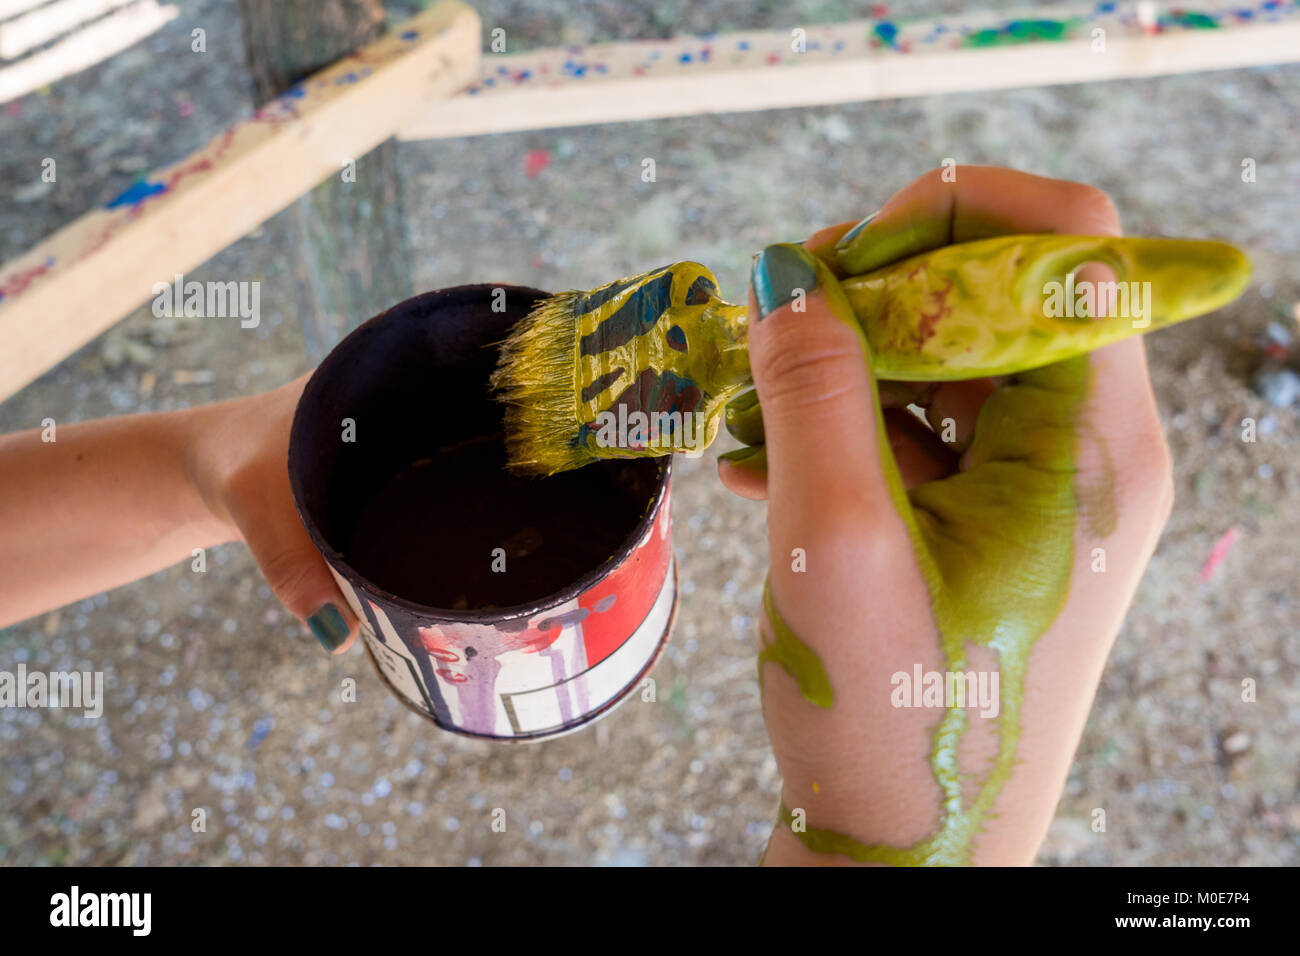 Female hand painting colorful wooden structure with brush Stock Photo